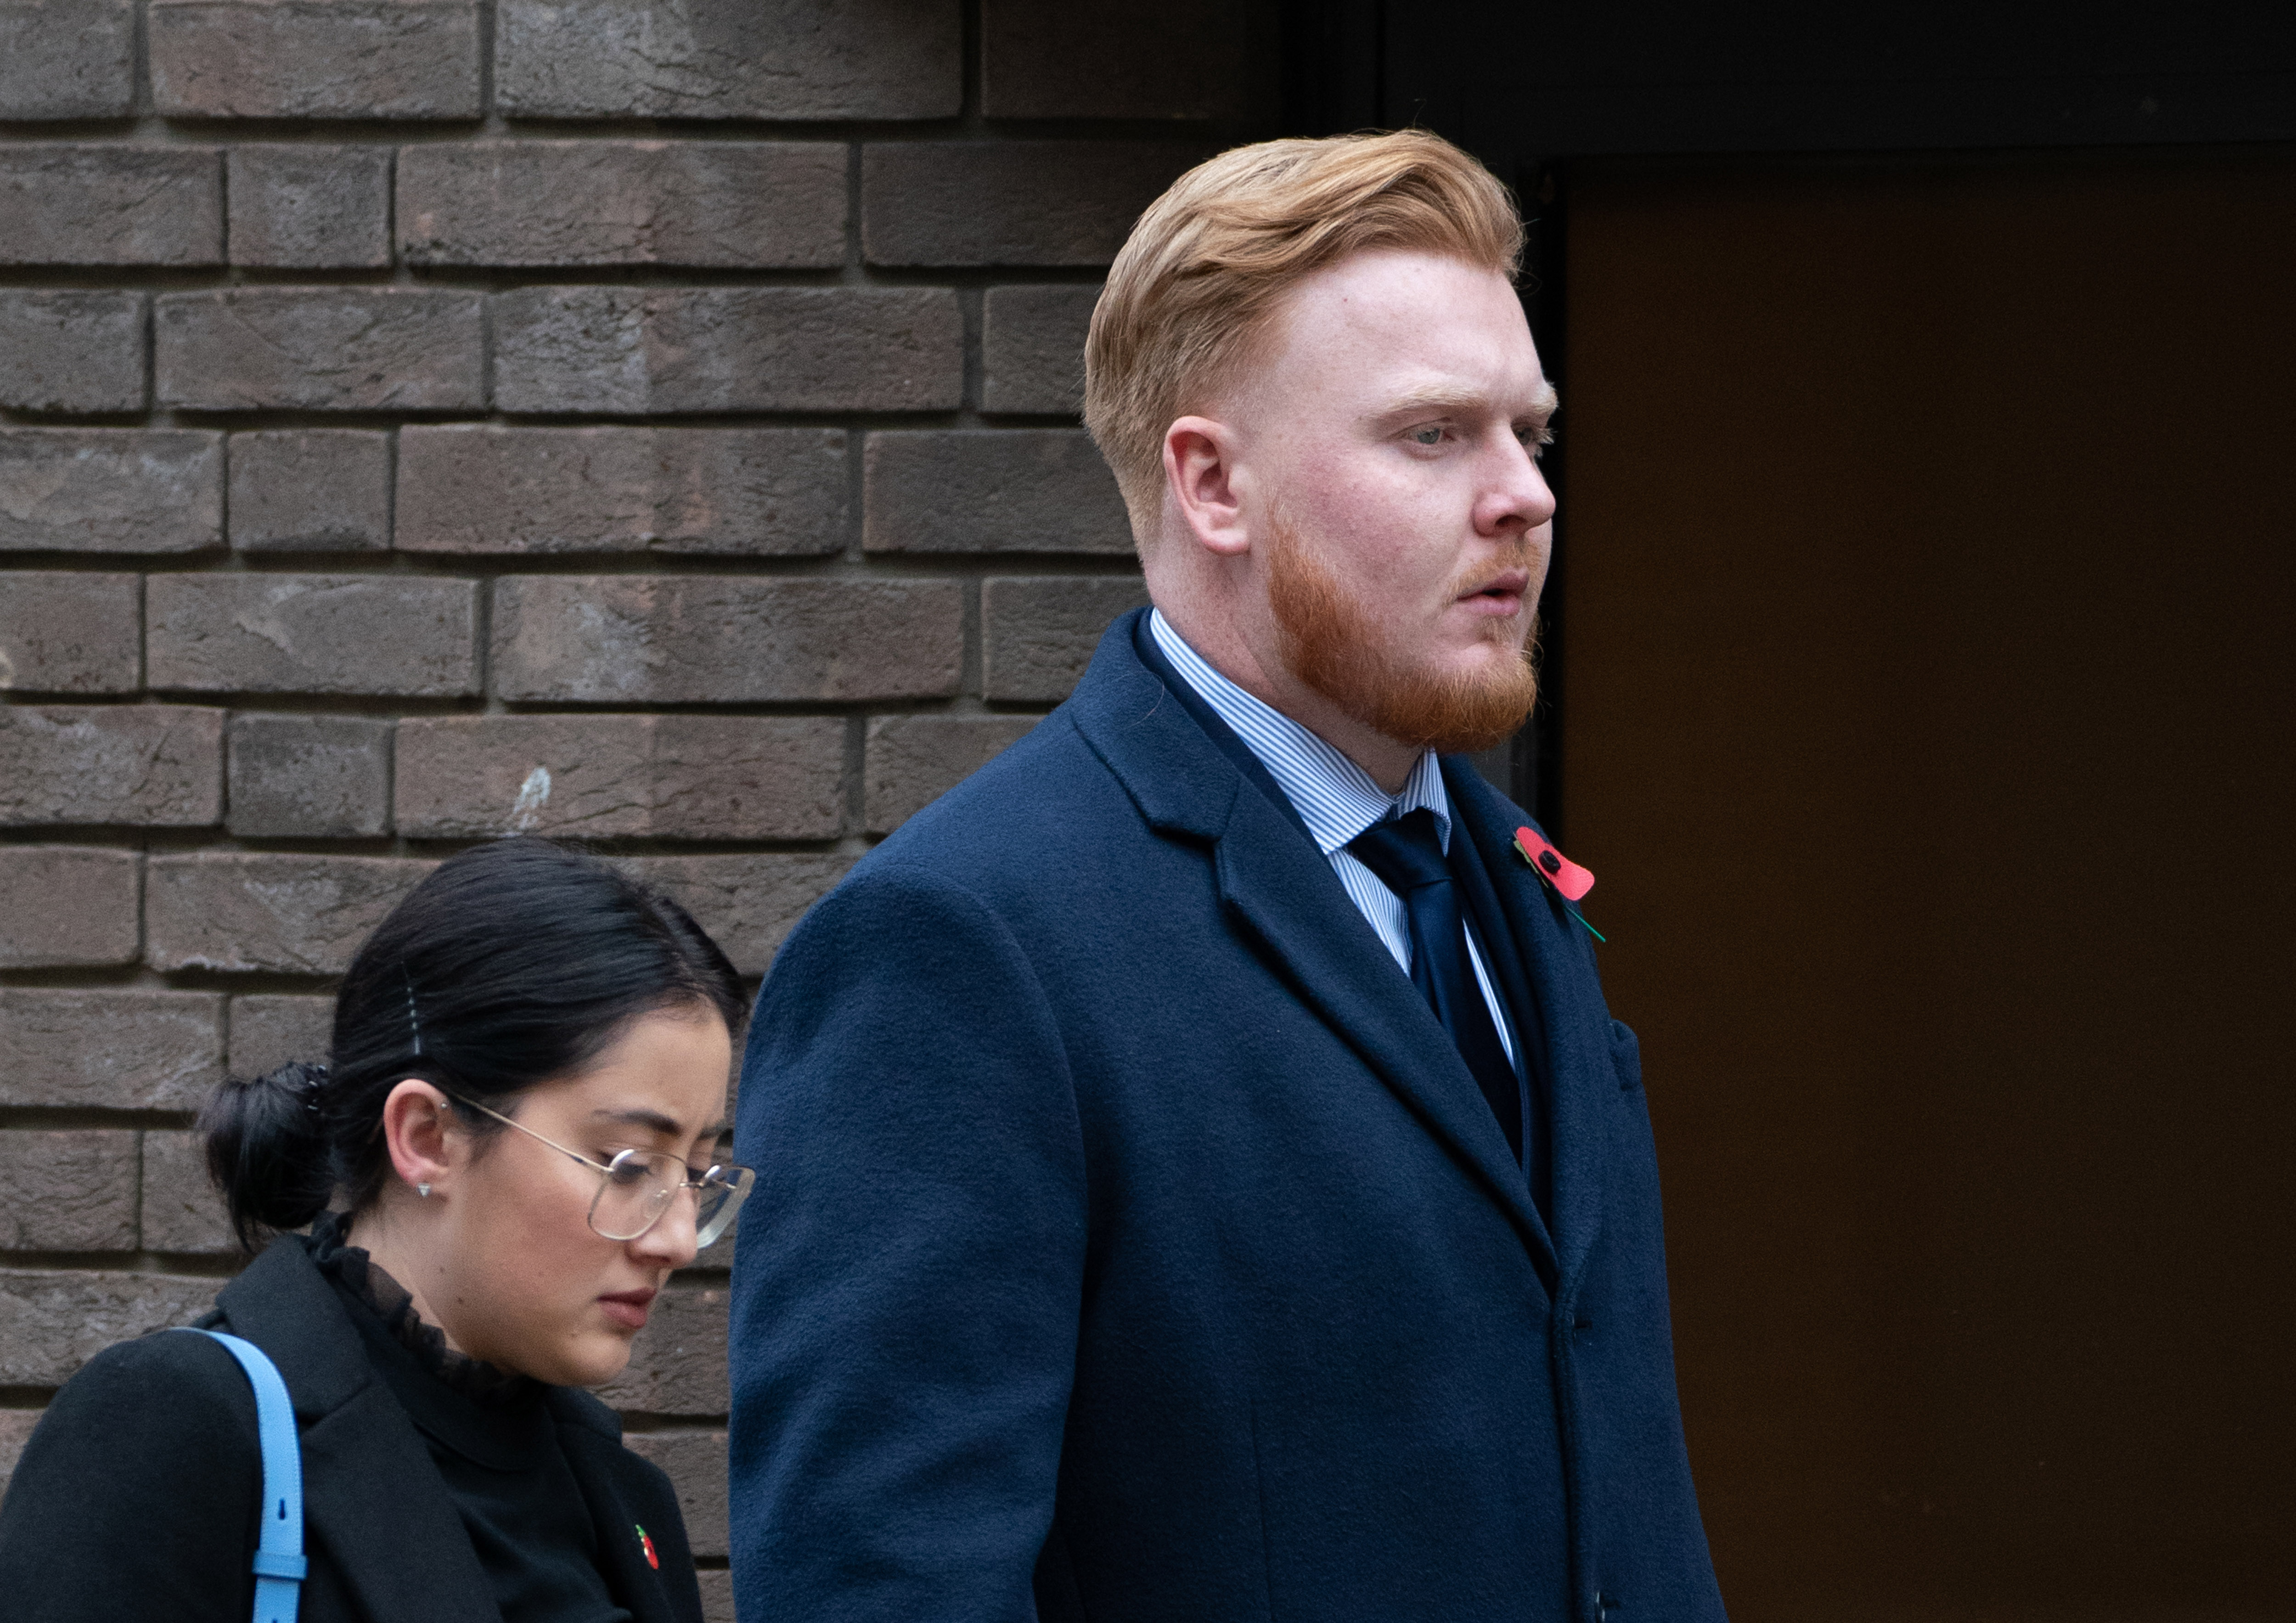 Metropolitan Police officer James Geoghegan was cleared of rape following a trial at Chelmsford Crown Court. (Joe Giddens/ PA)